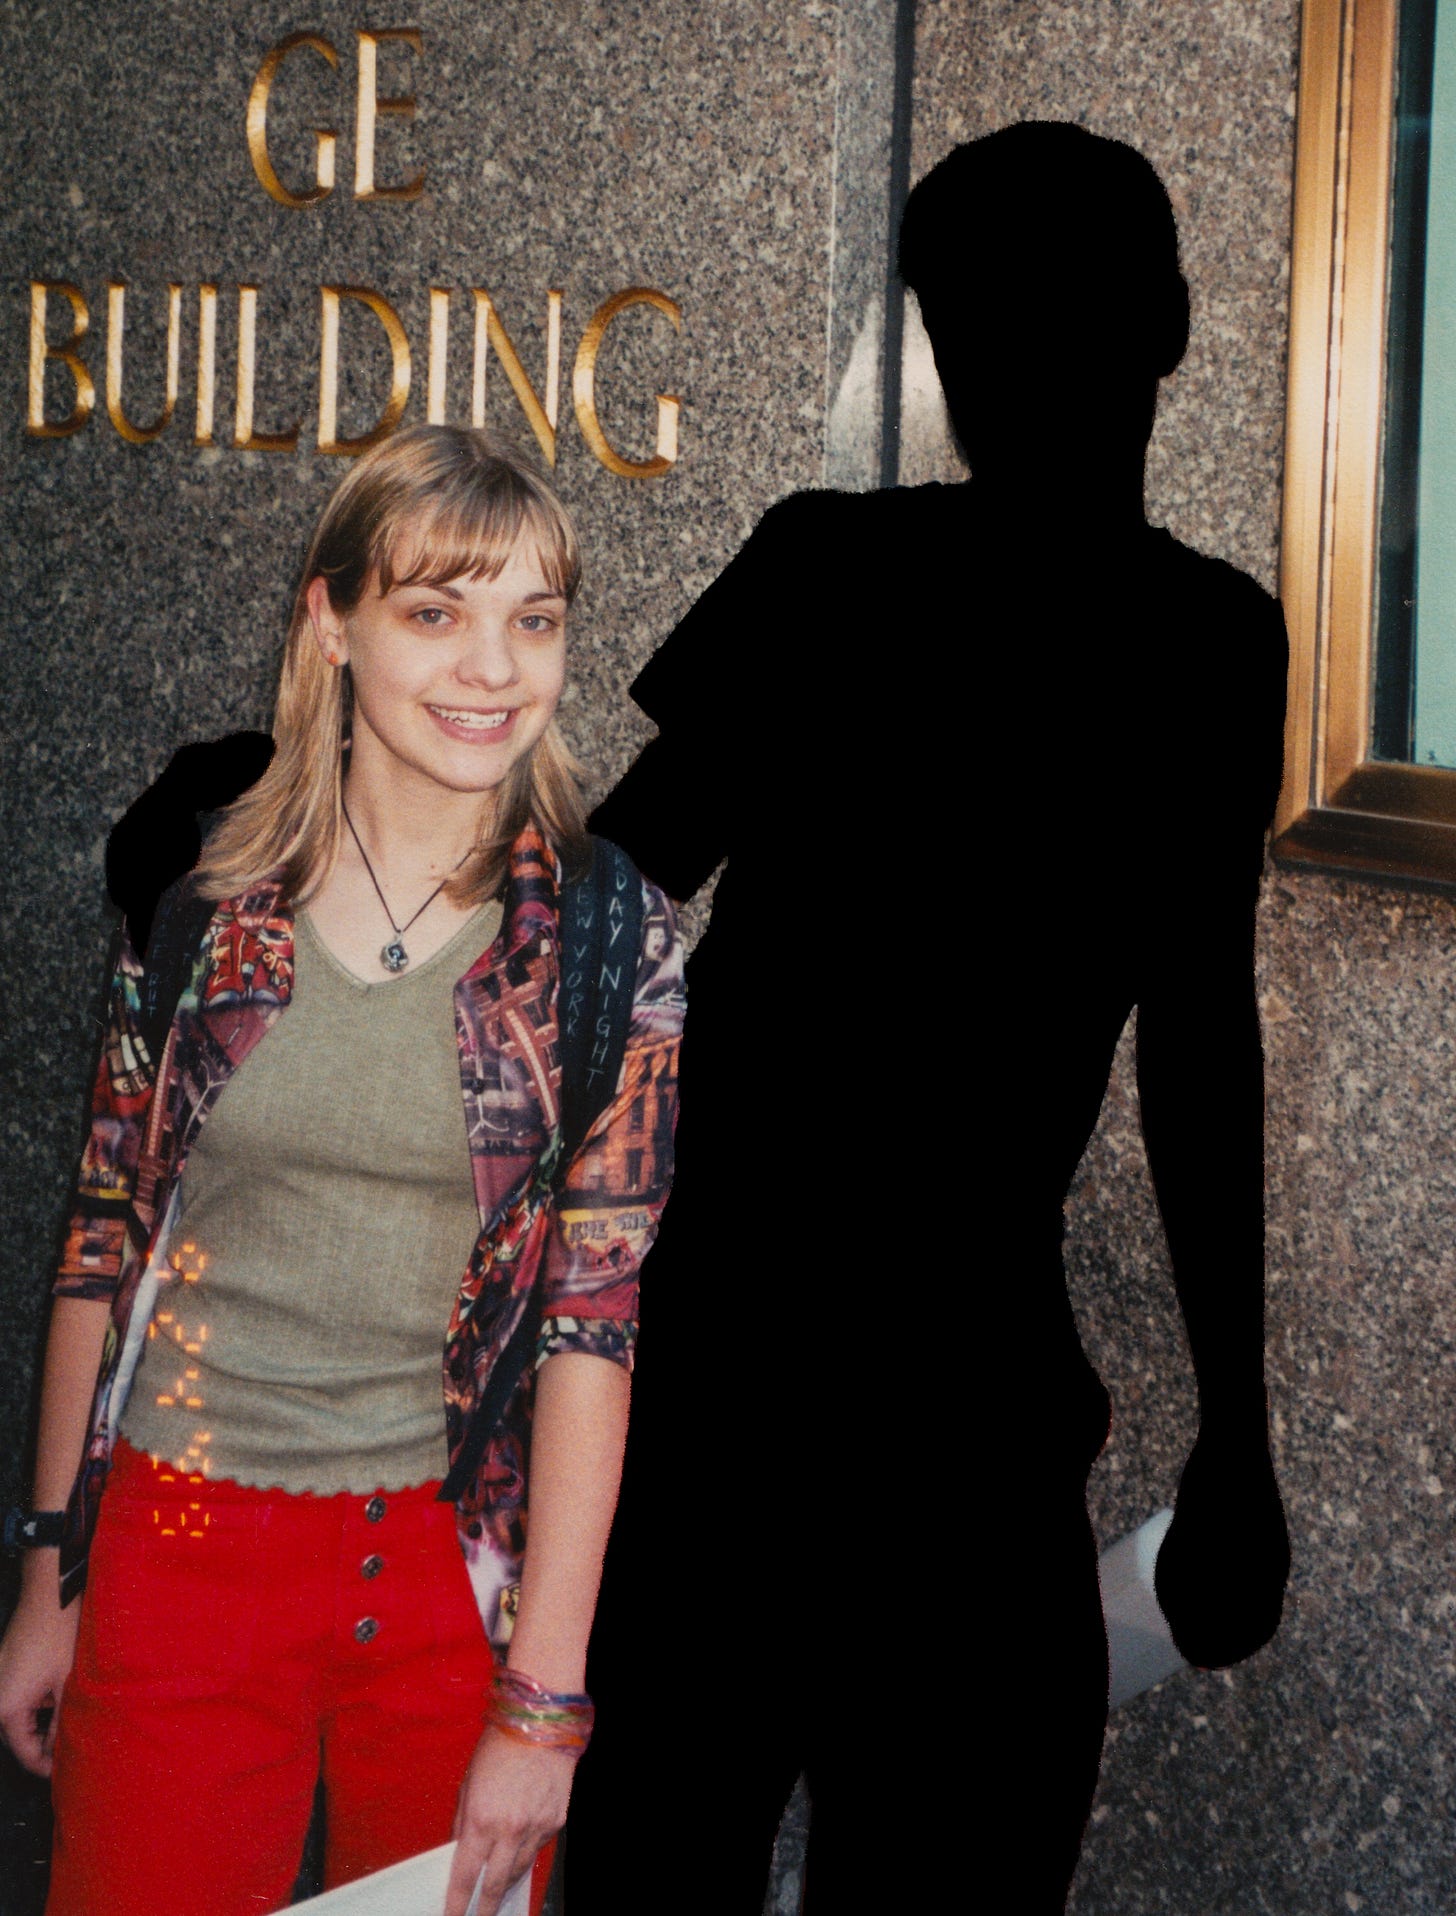 My brother and I outside of 30 Rock in NYC. I am 15. He is silhouetted.